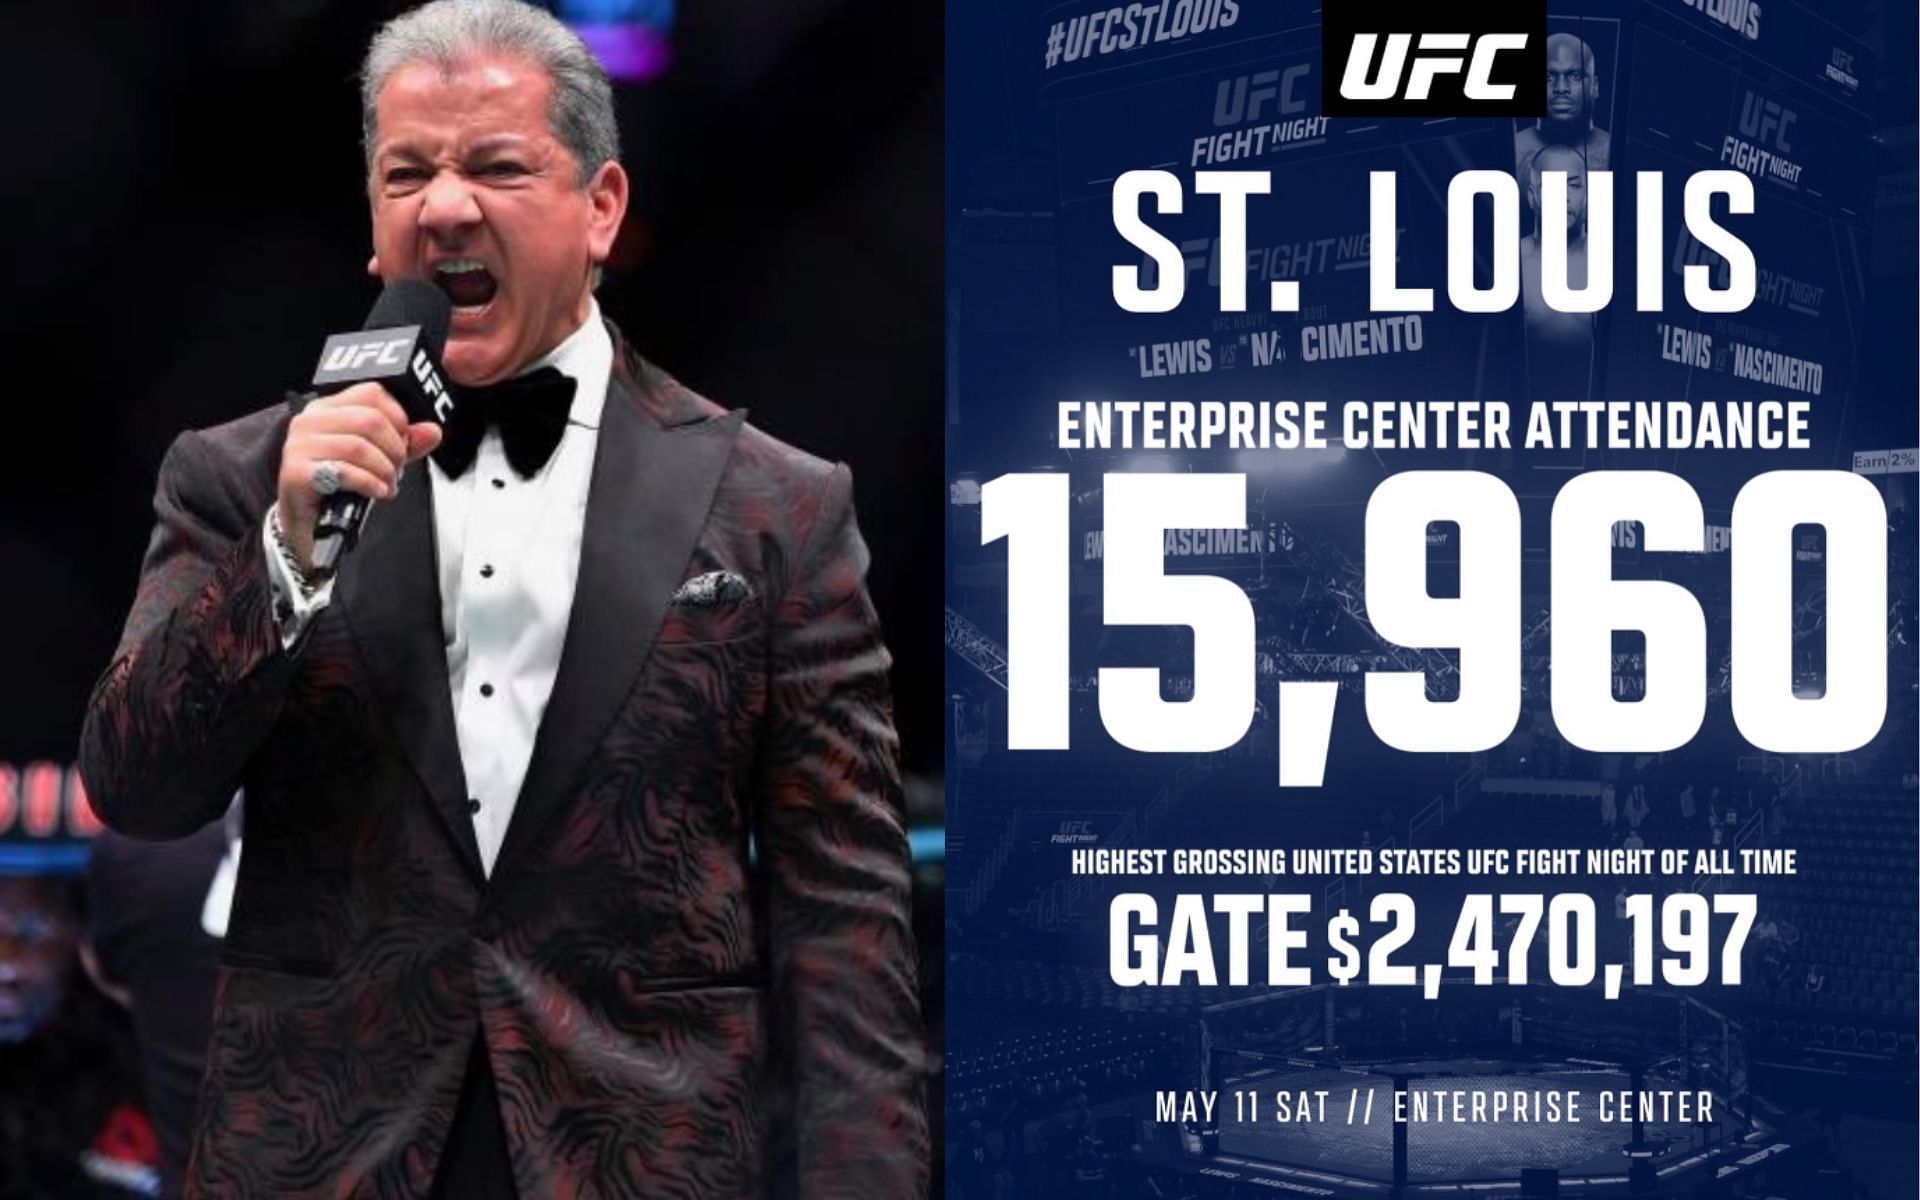 Bruce Buffer praises fans for shattering a new record at UFC St. Louis [Images courtesy of @brucebuffer on Instagram]